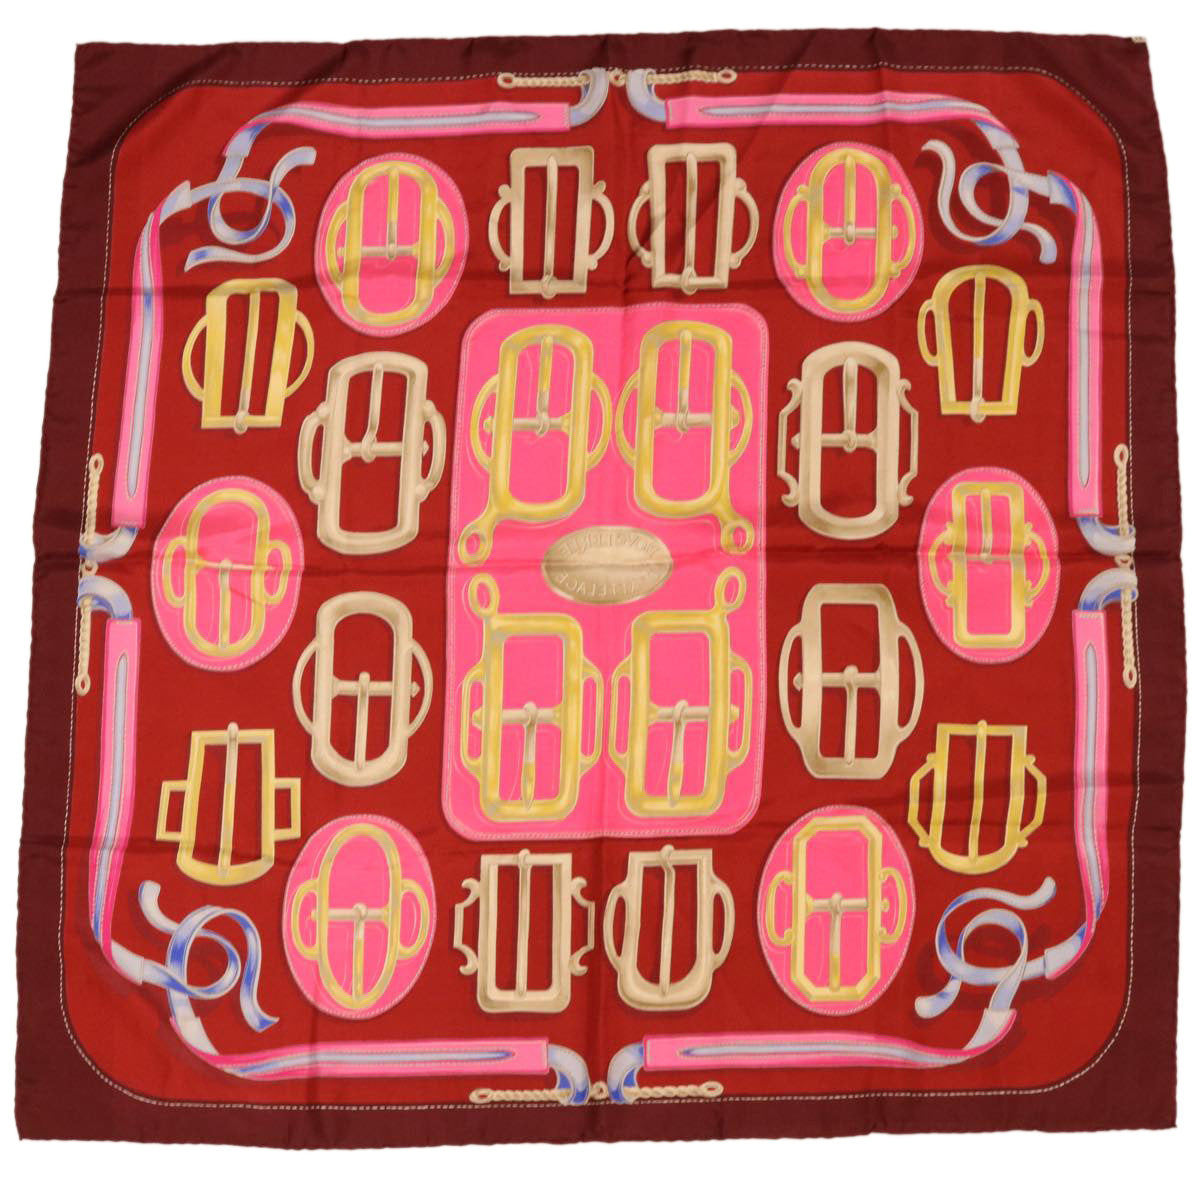 HERMES Carre 90 Scarf ”BOVCLERIE DATTELAGE"" Silk Pink Auth ar9197